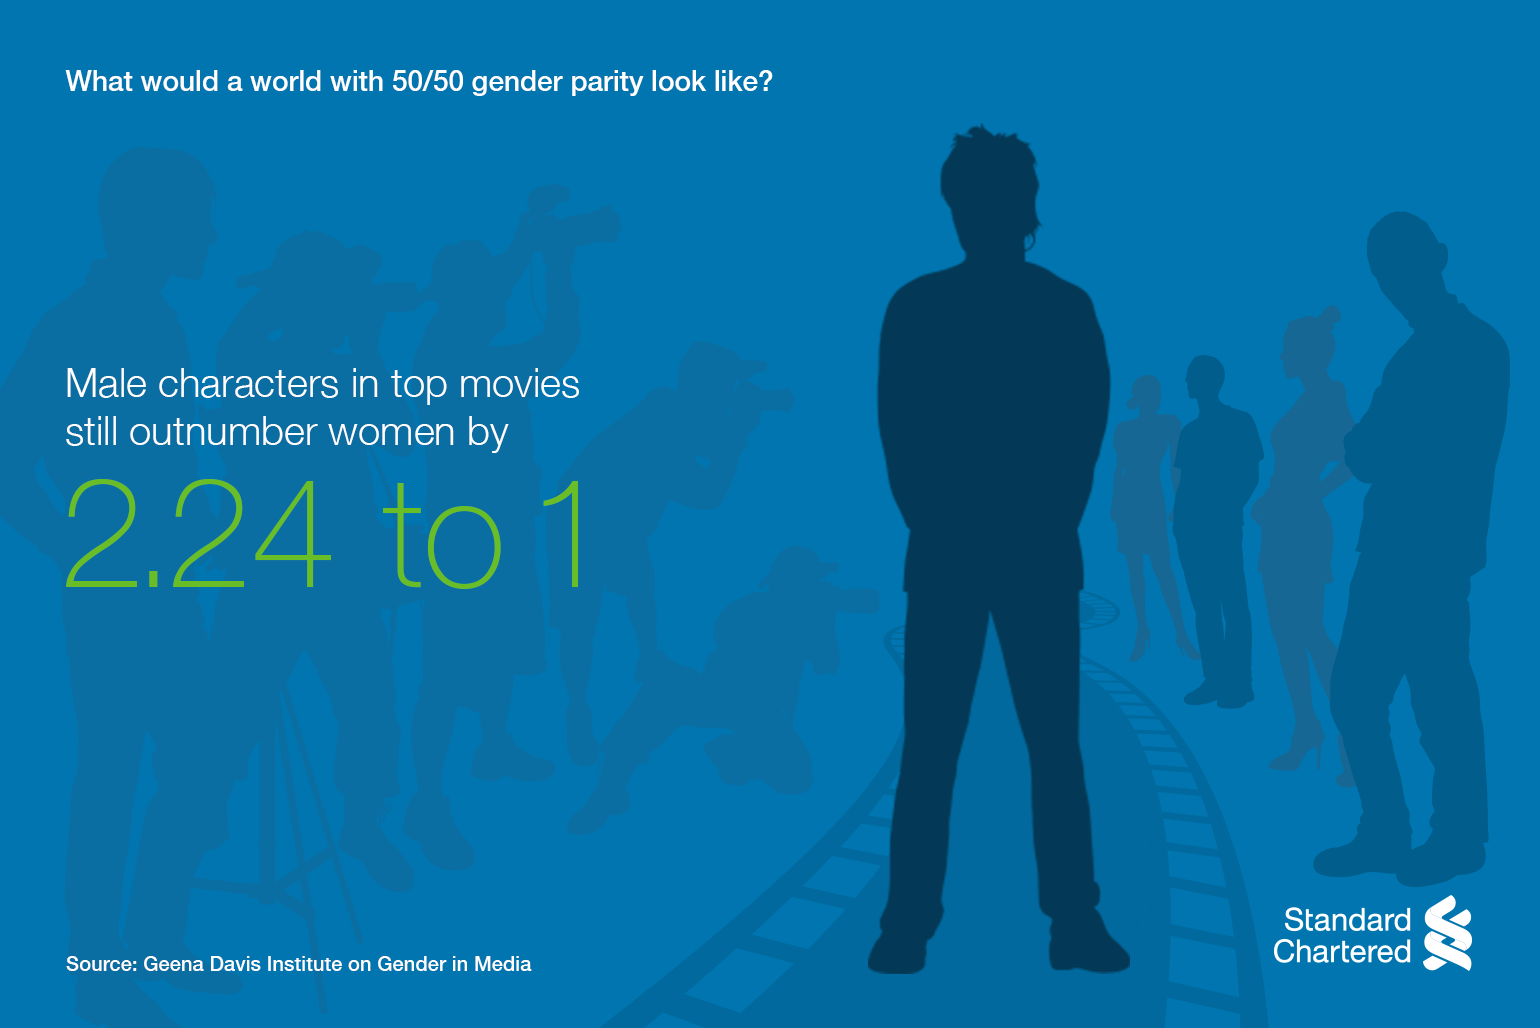 Male characters in top movies still outnumber women by 2.24 to 1